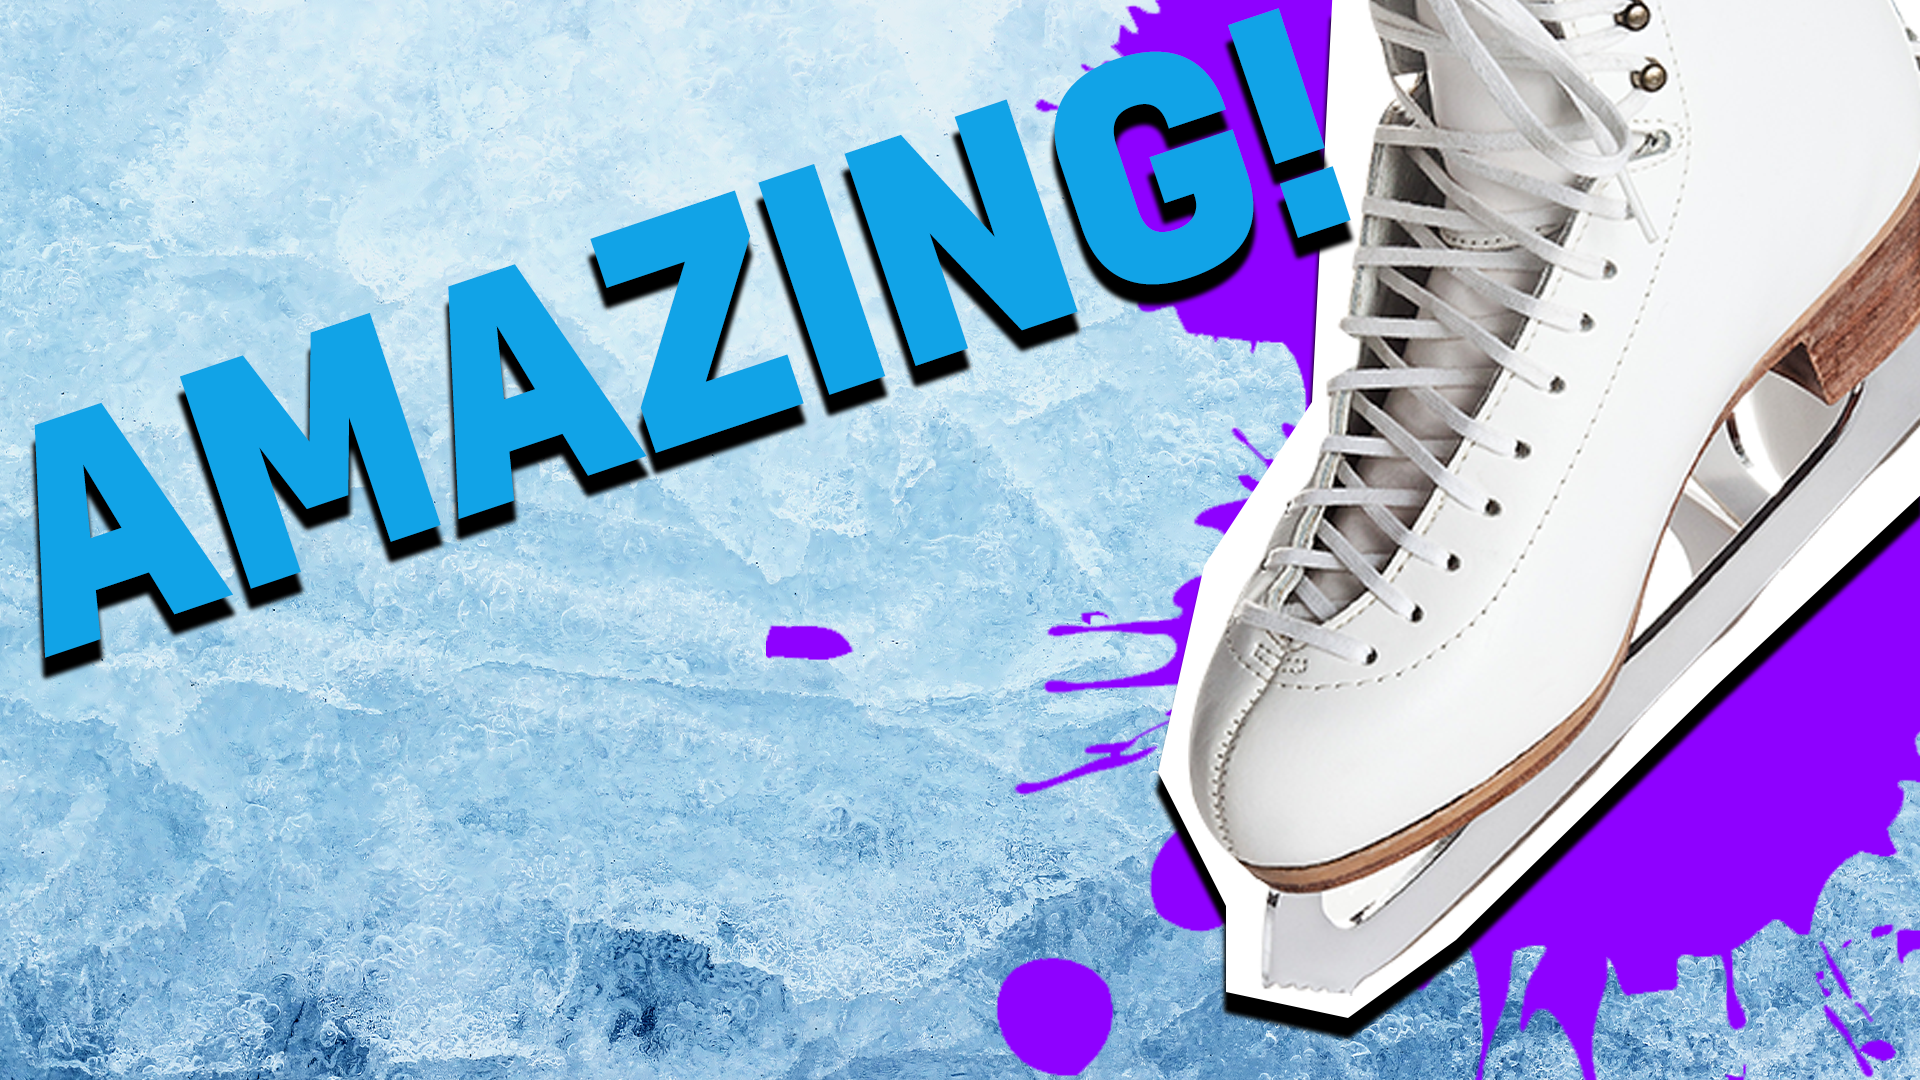 Incredible! You're truly a Dancing on Ice superfan, because you got 100%! Congrats!